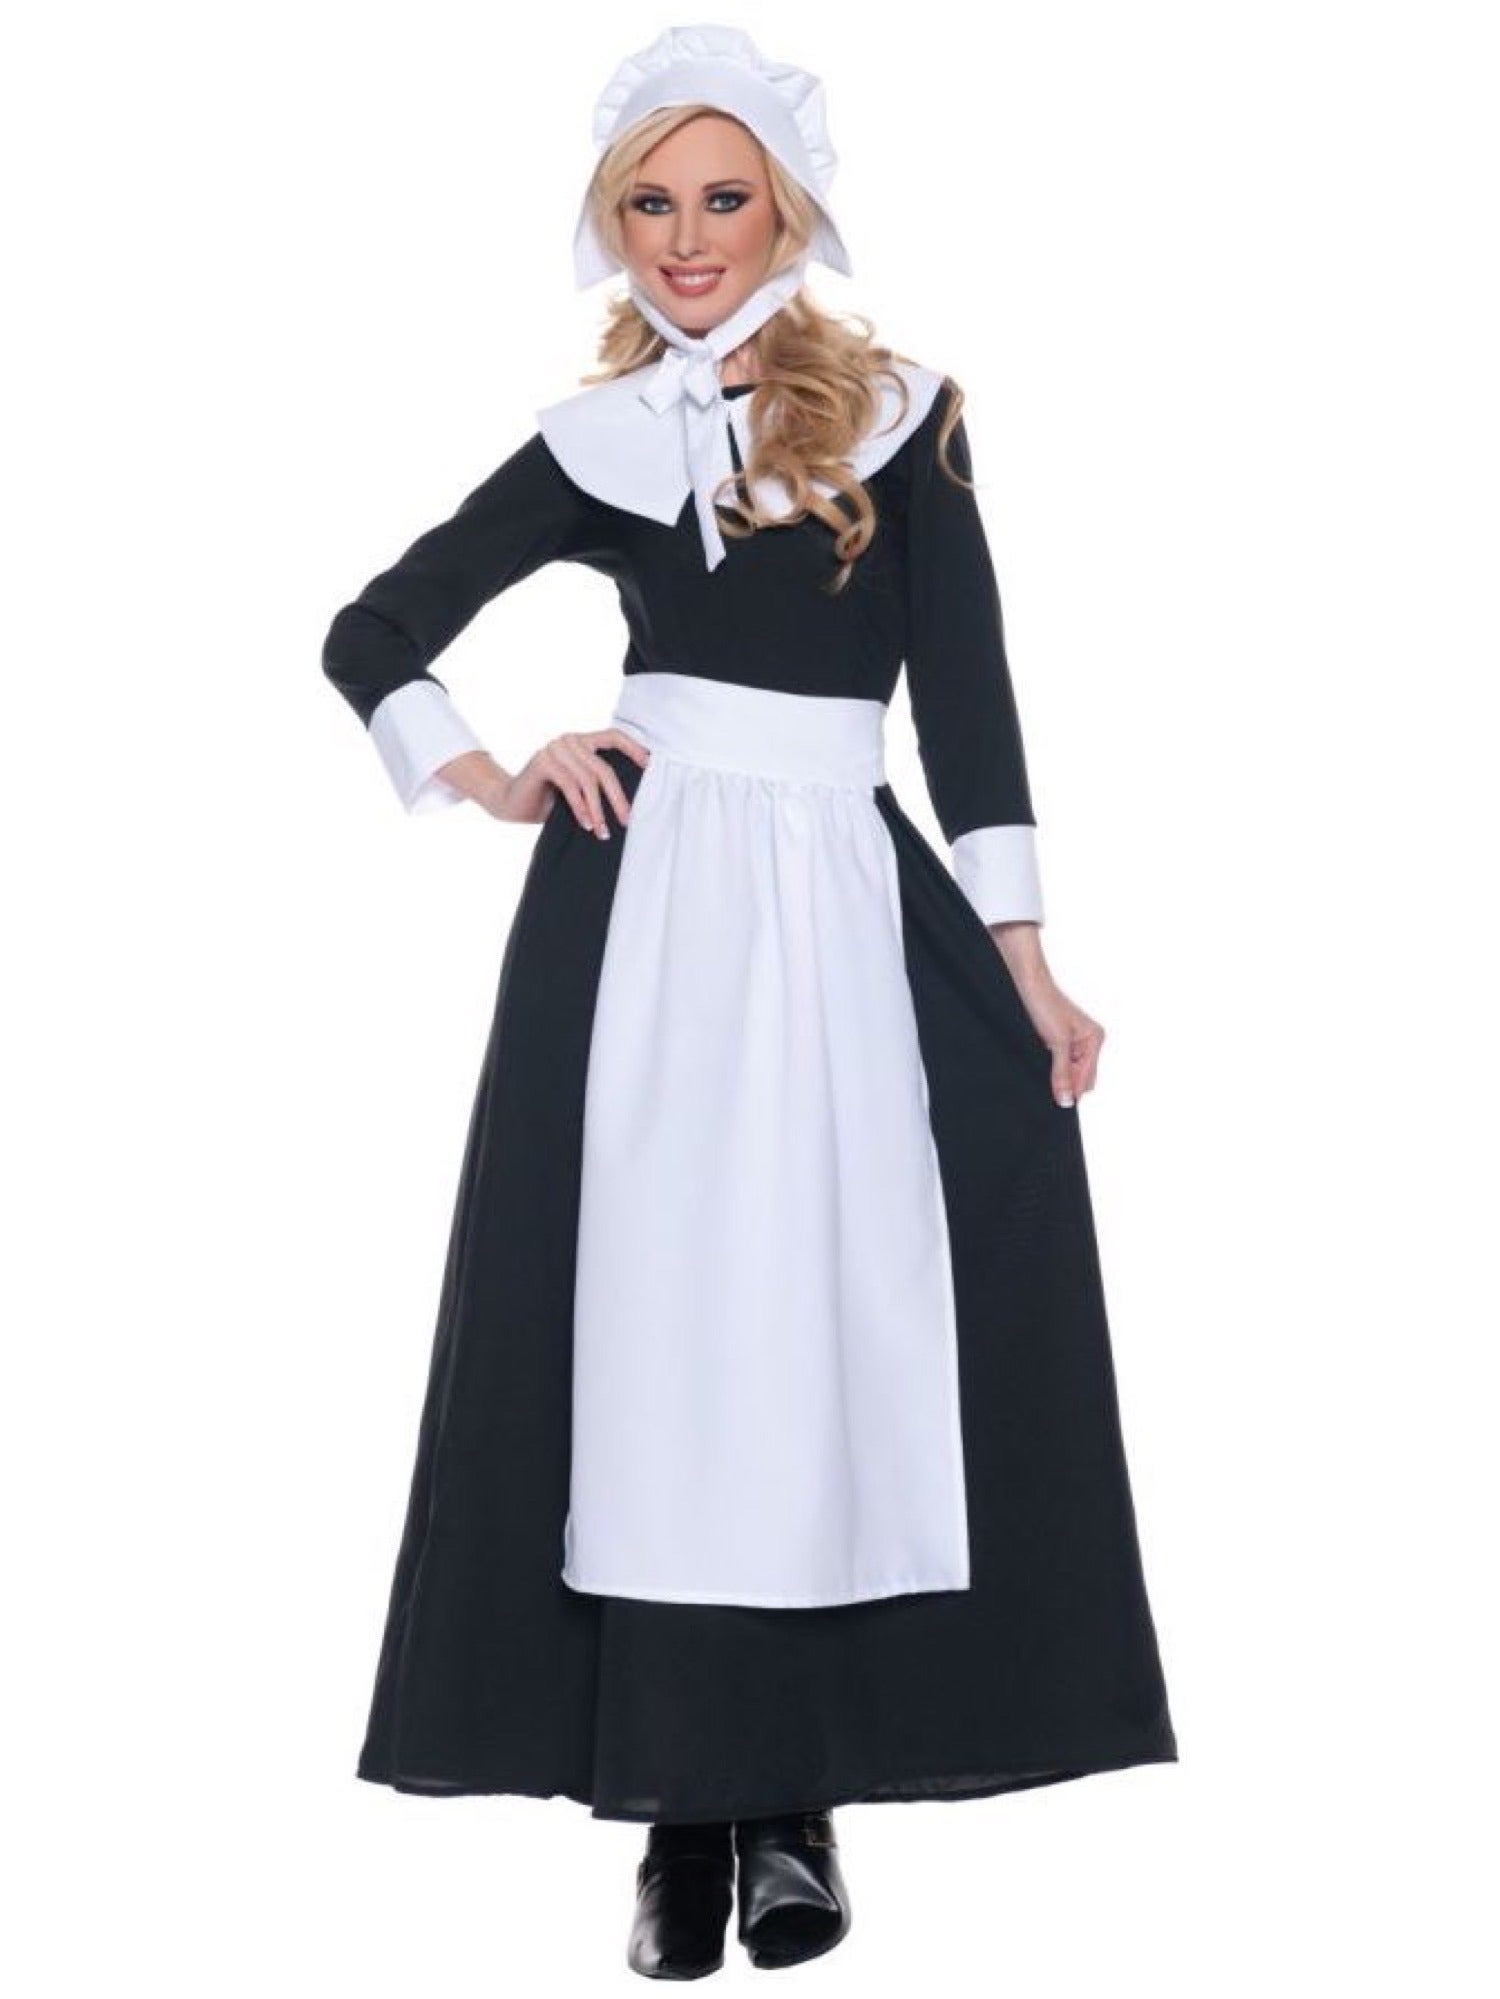 Hobbypos Pilgrim Colonial Victoria Thanksgiving Olden Day Historical Adult Womens Costume